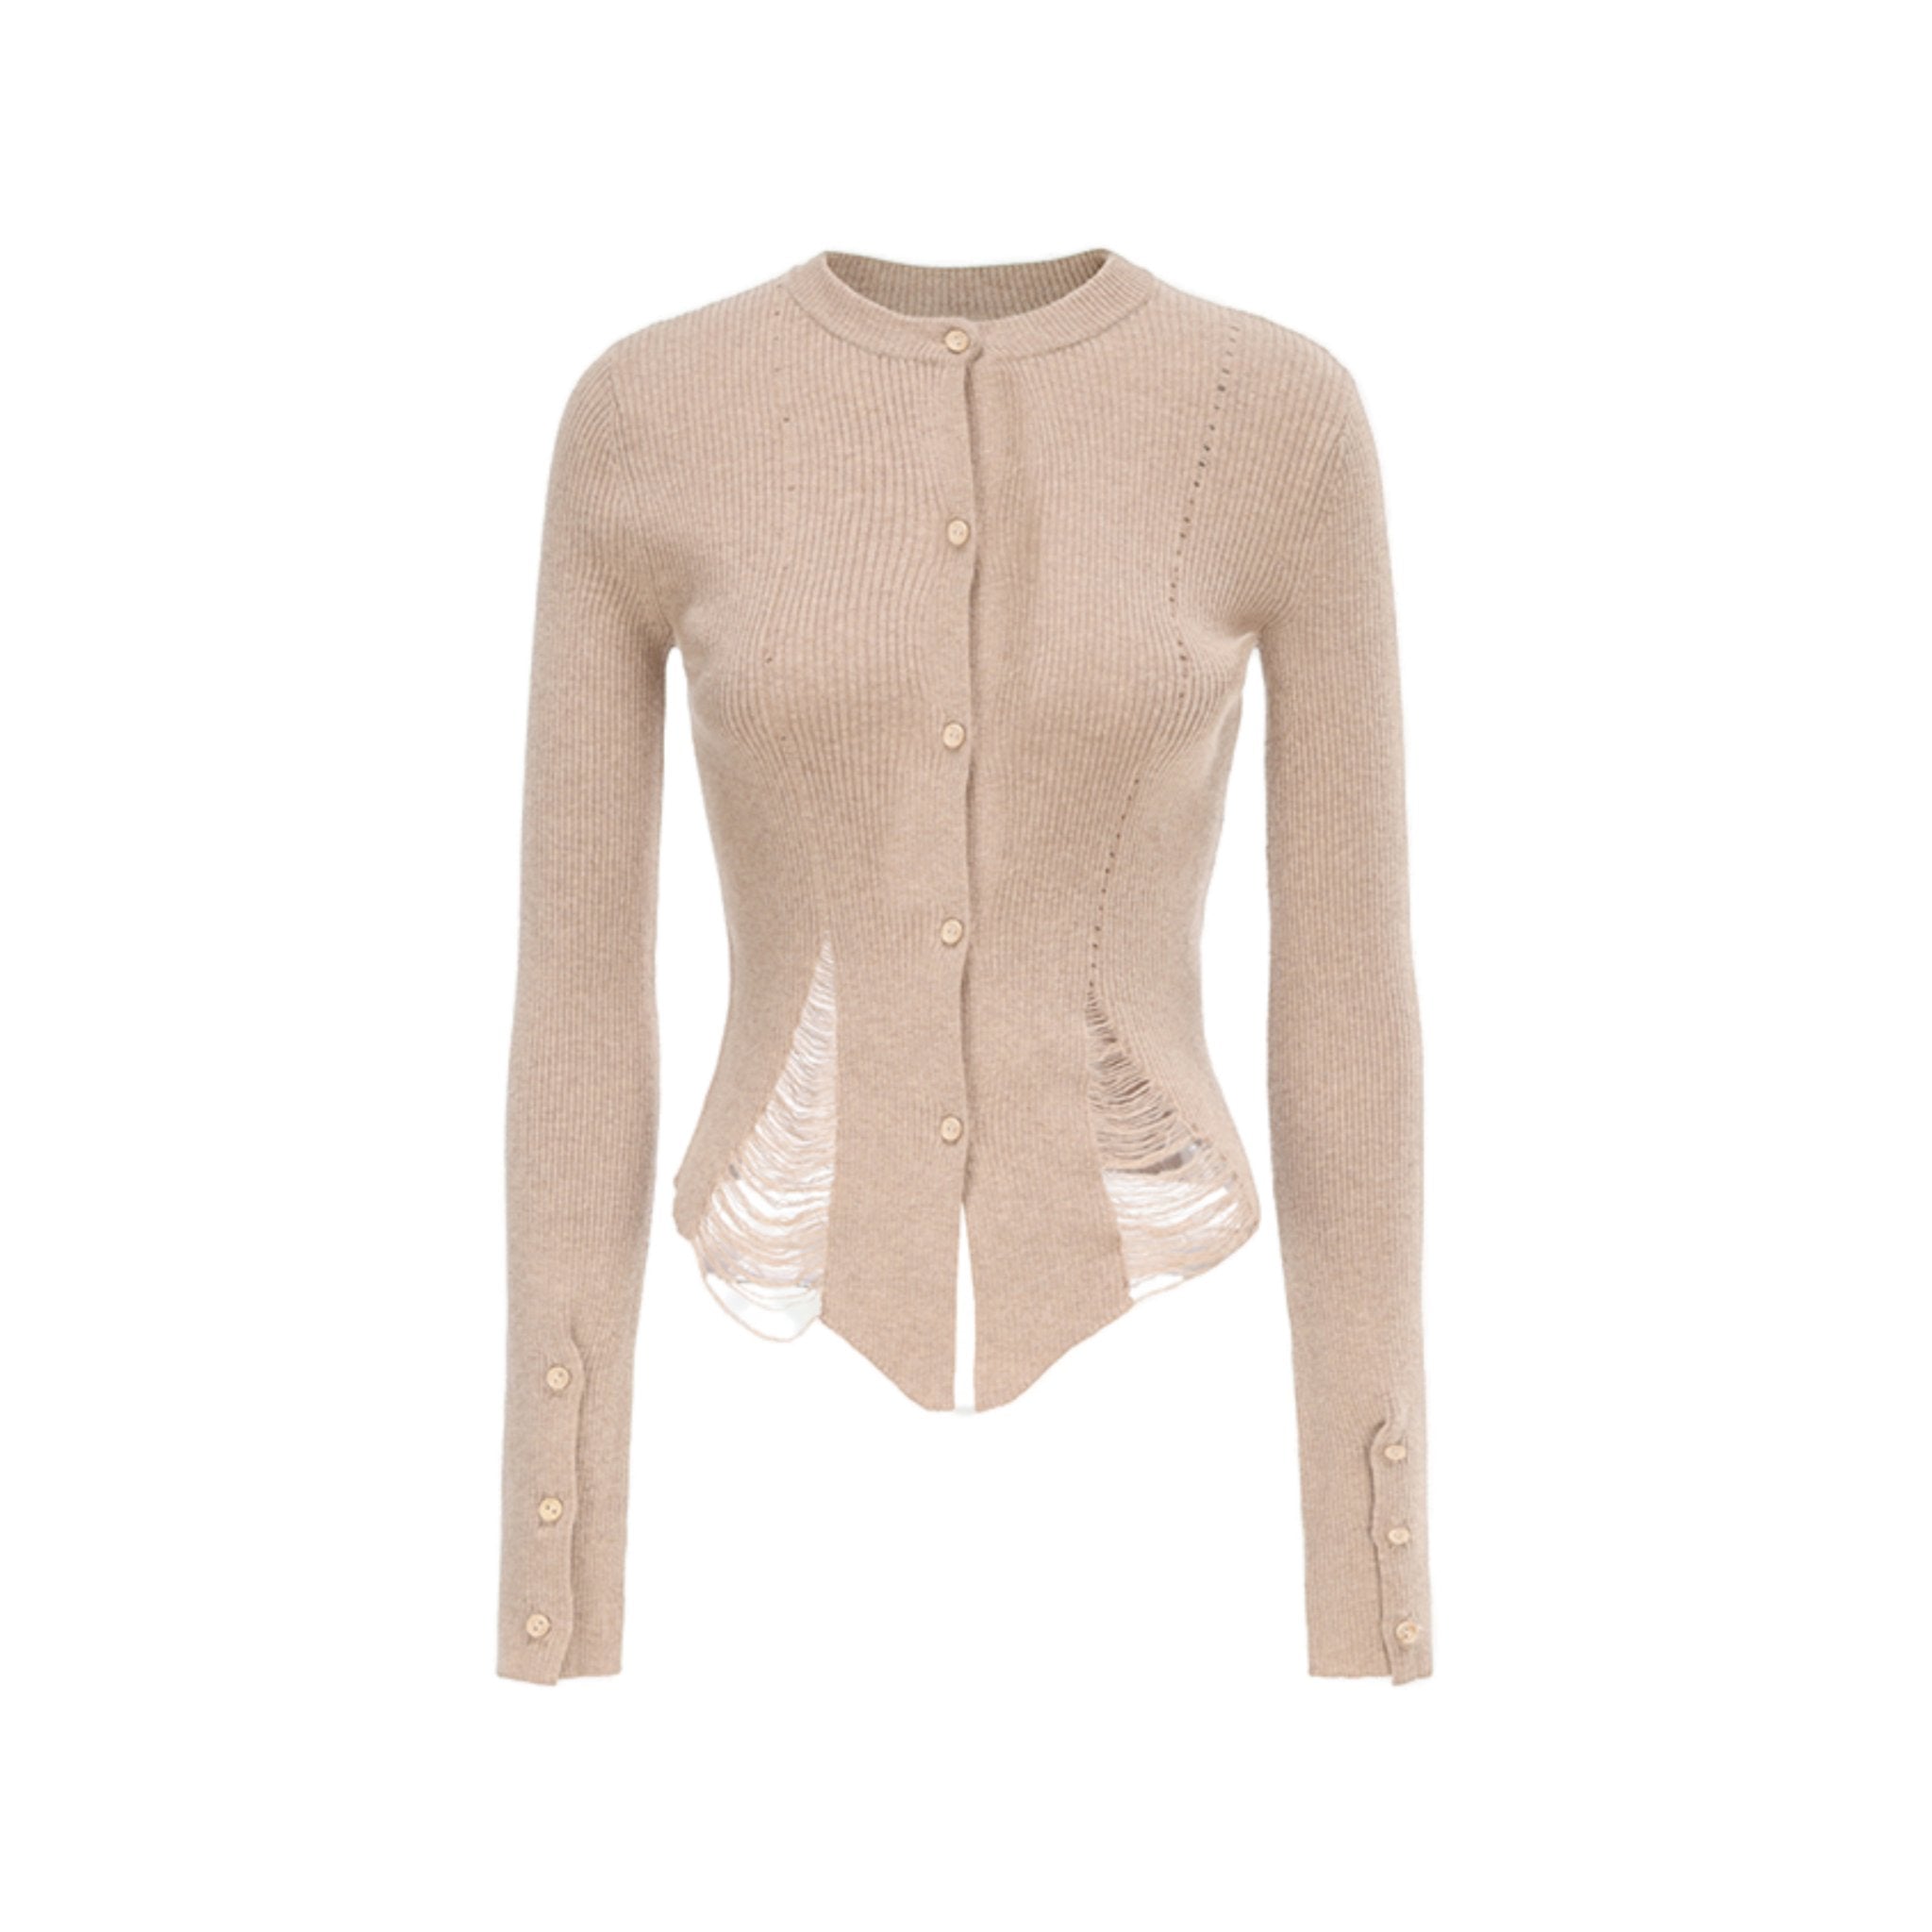 ELYWOOD Almond Knit Destruction Top | MADA IN CHINA